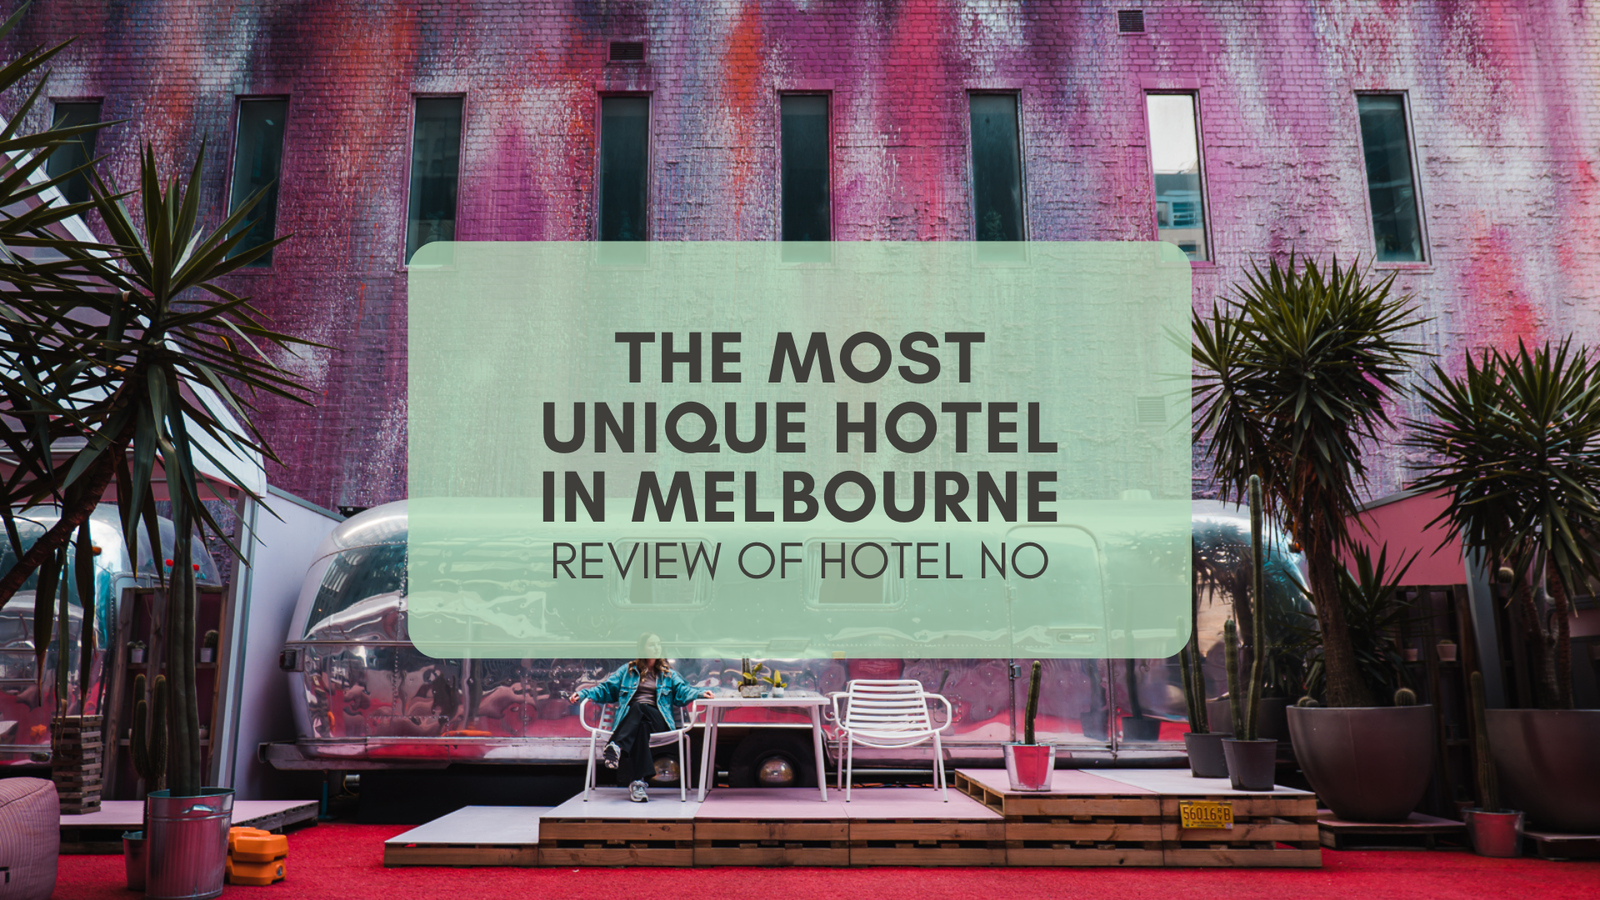 The most unique and photogenic hotel in Melbourne - Hotel NO review